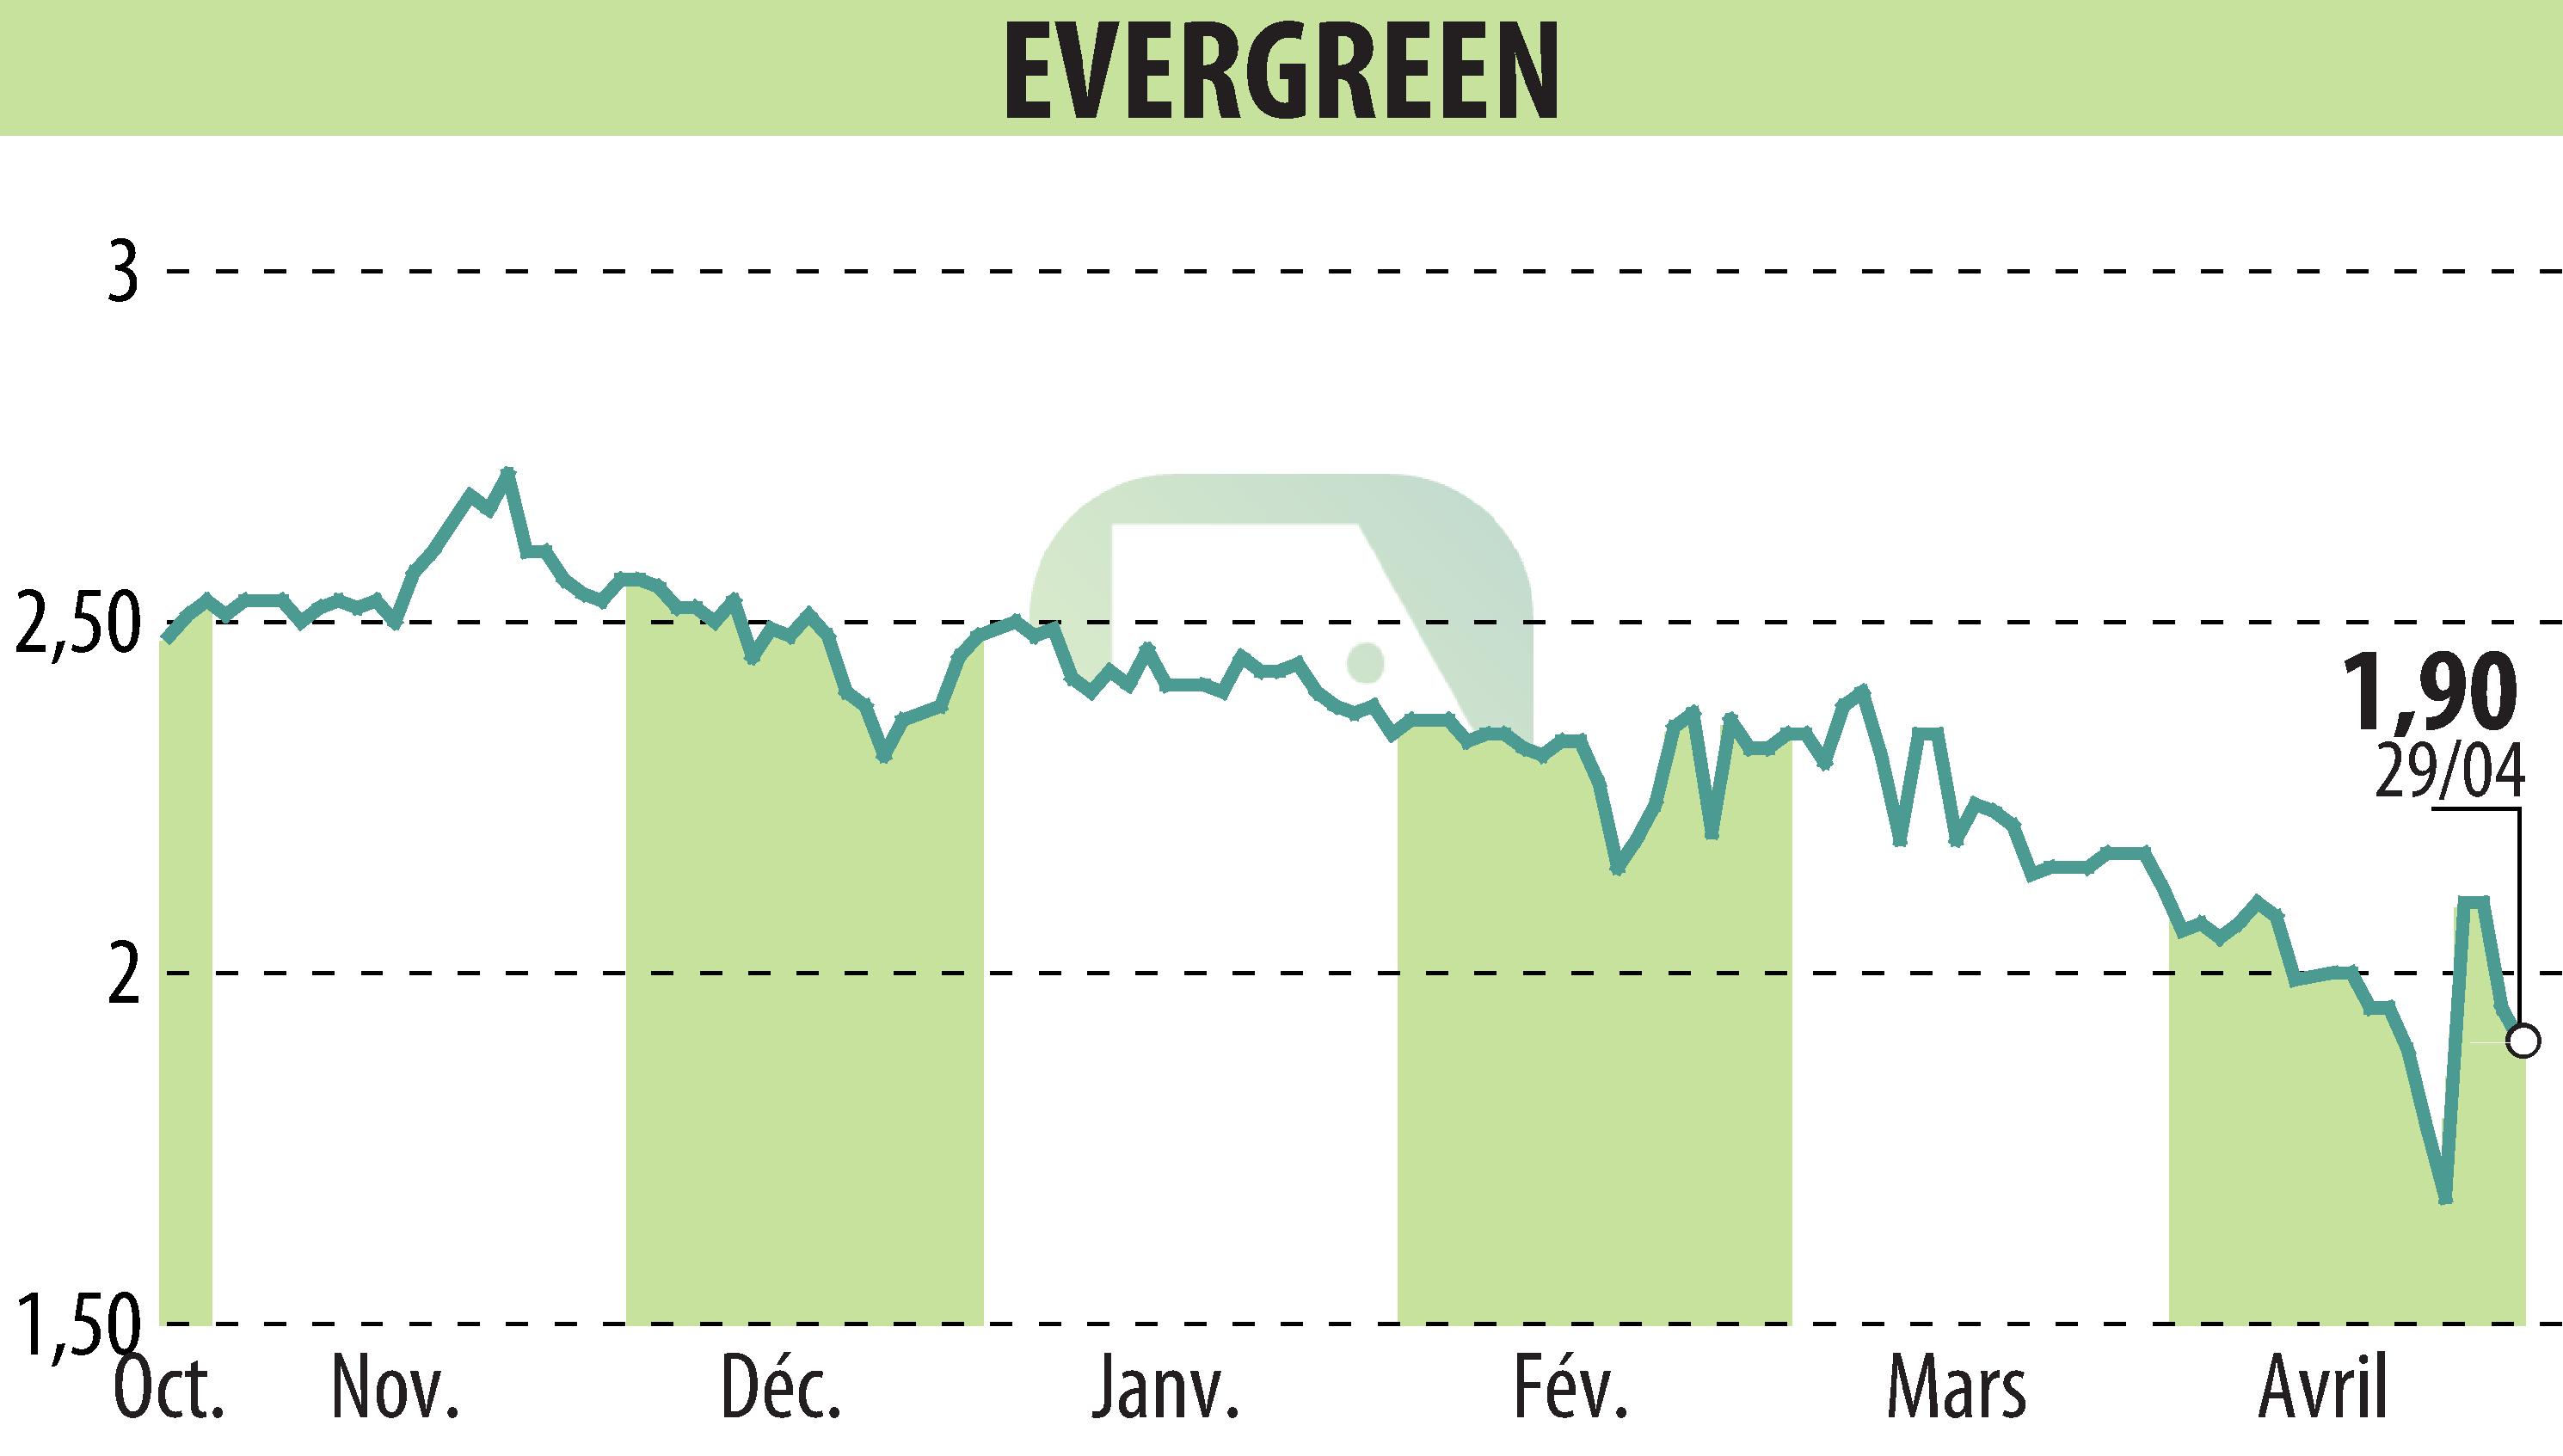 Stock price chart of EVERGREEN (EPA:EGR) showing fluctuations.